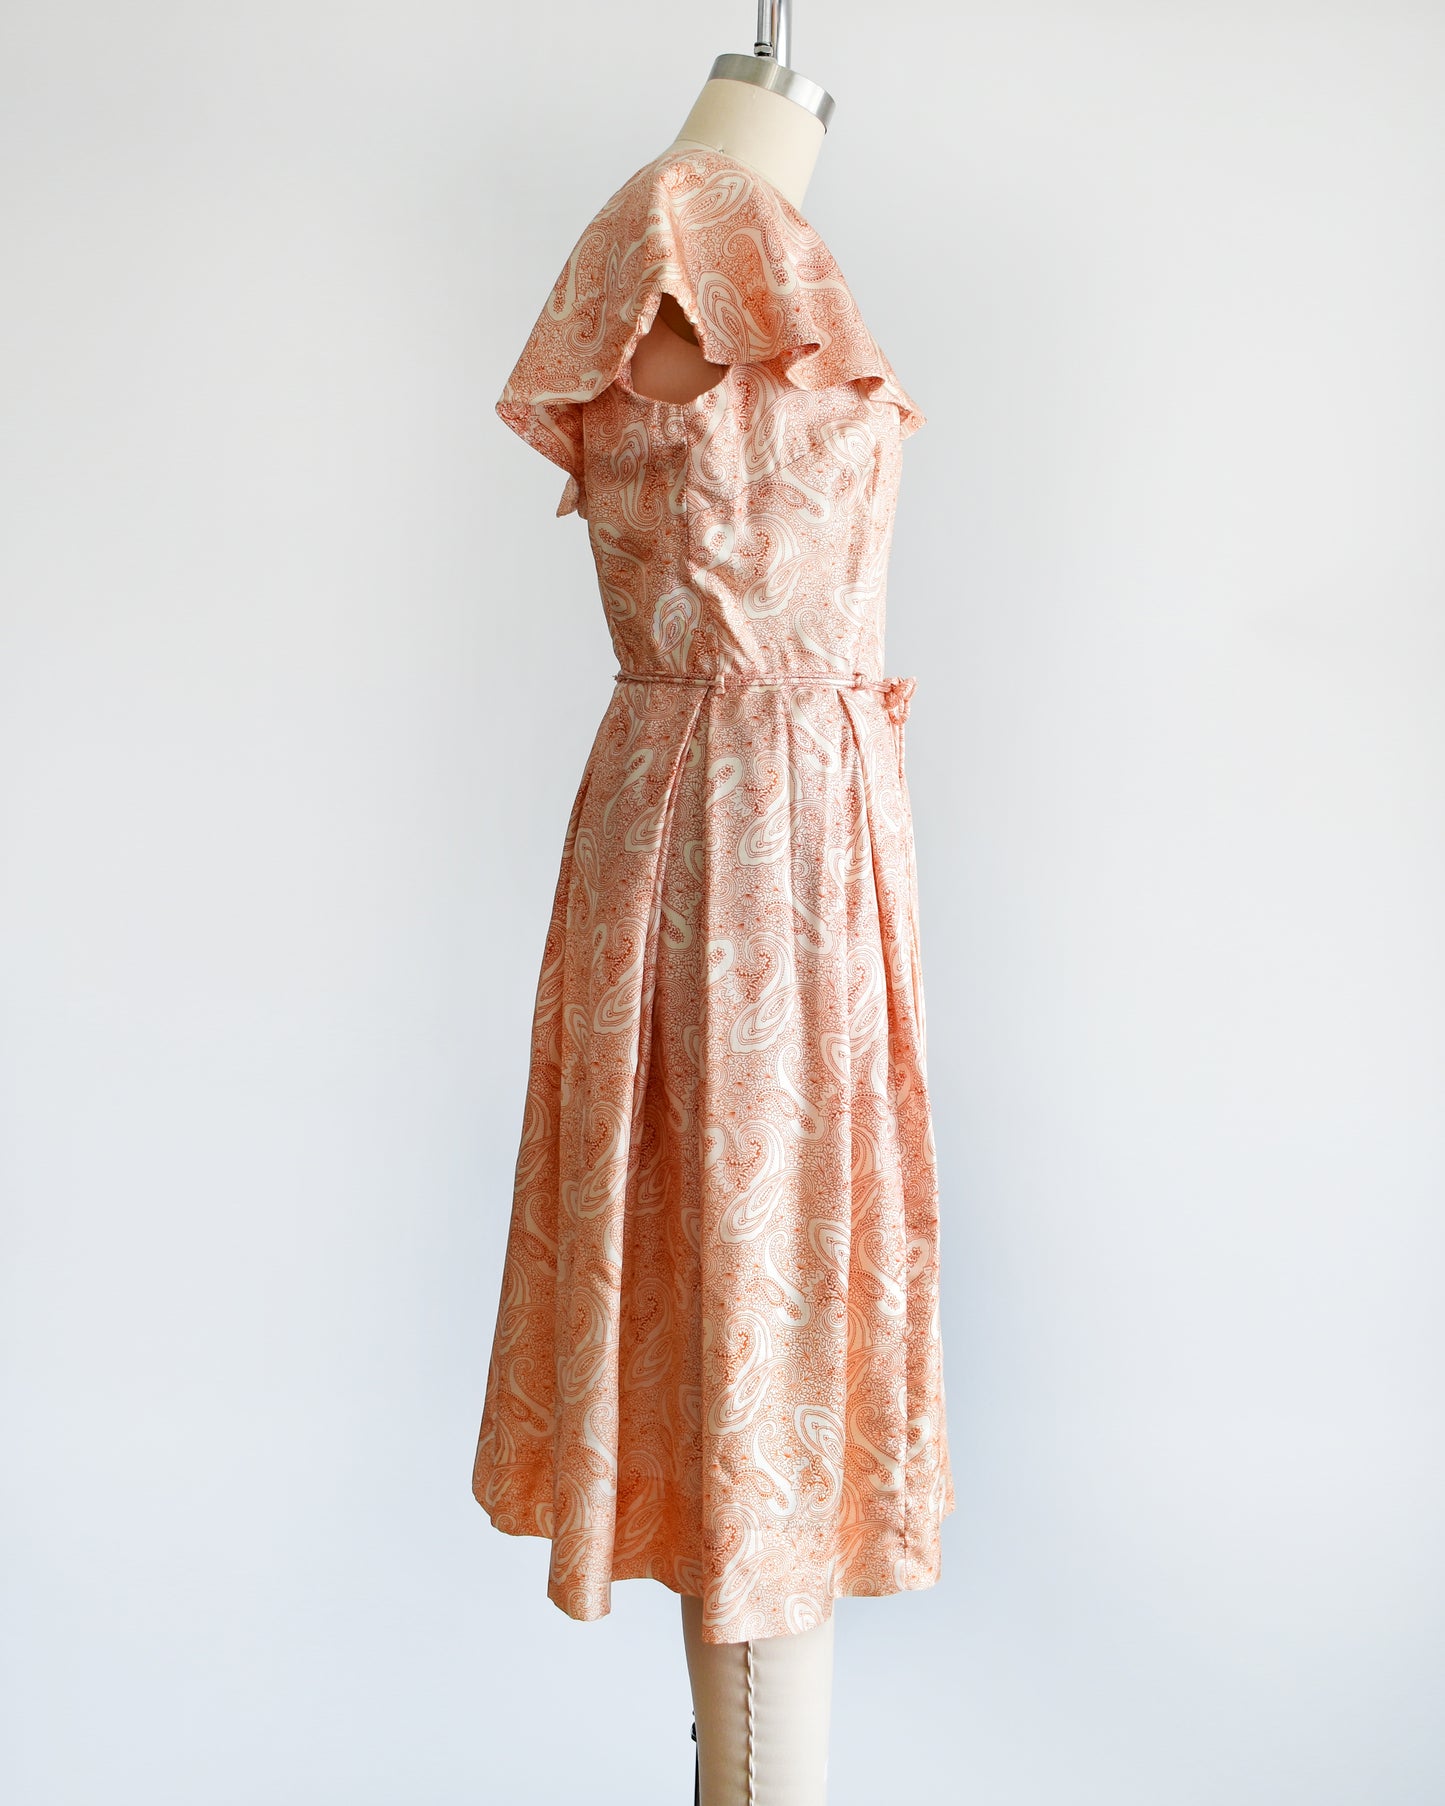 Side view of a vintage 1960s dress that features an orange and white paisley print, a ruffled collar, matching tie belt, and pleated skirt.